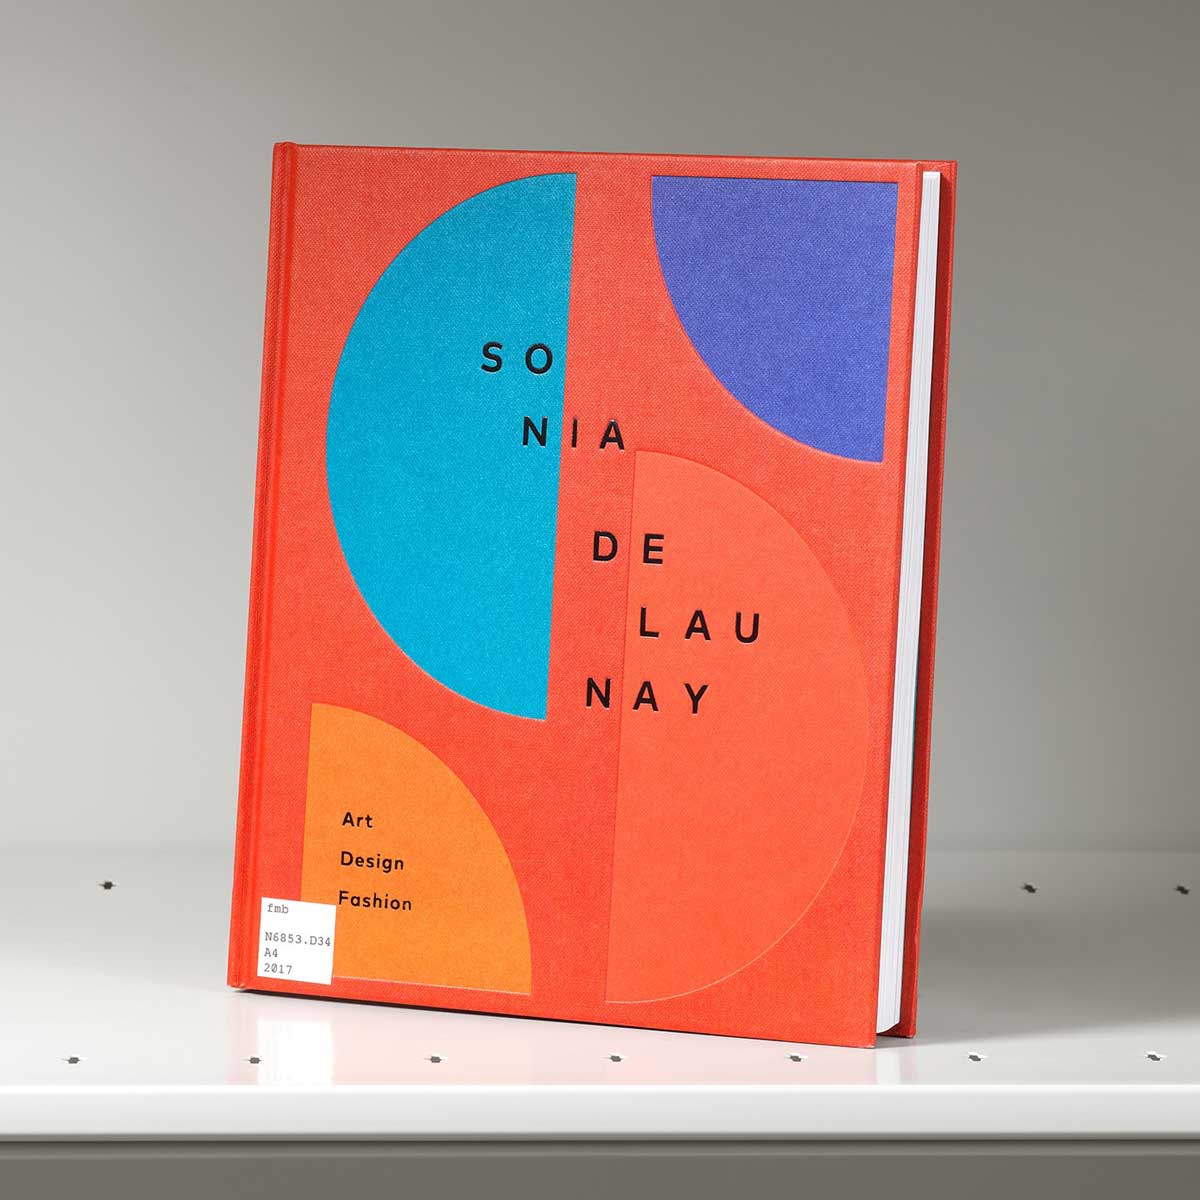 Book on a shelf whose cover features orange, red, and light and dark blue sections of a circle against a red background